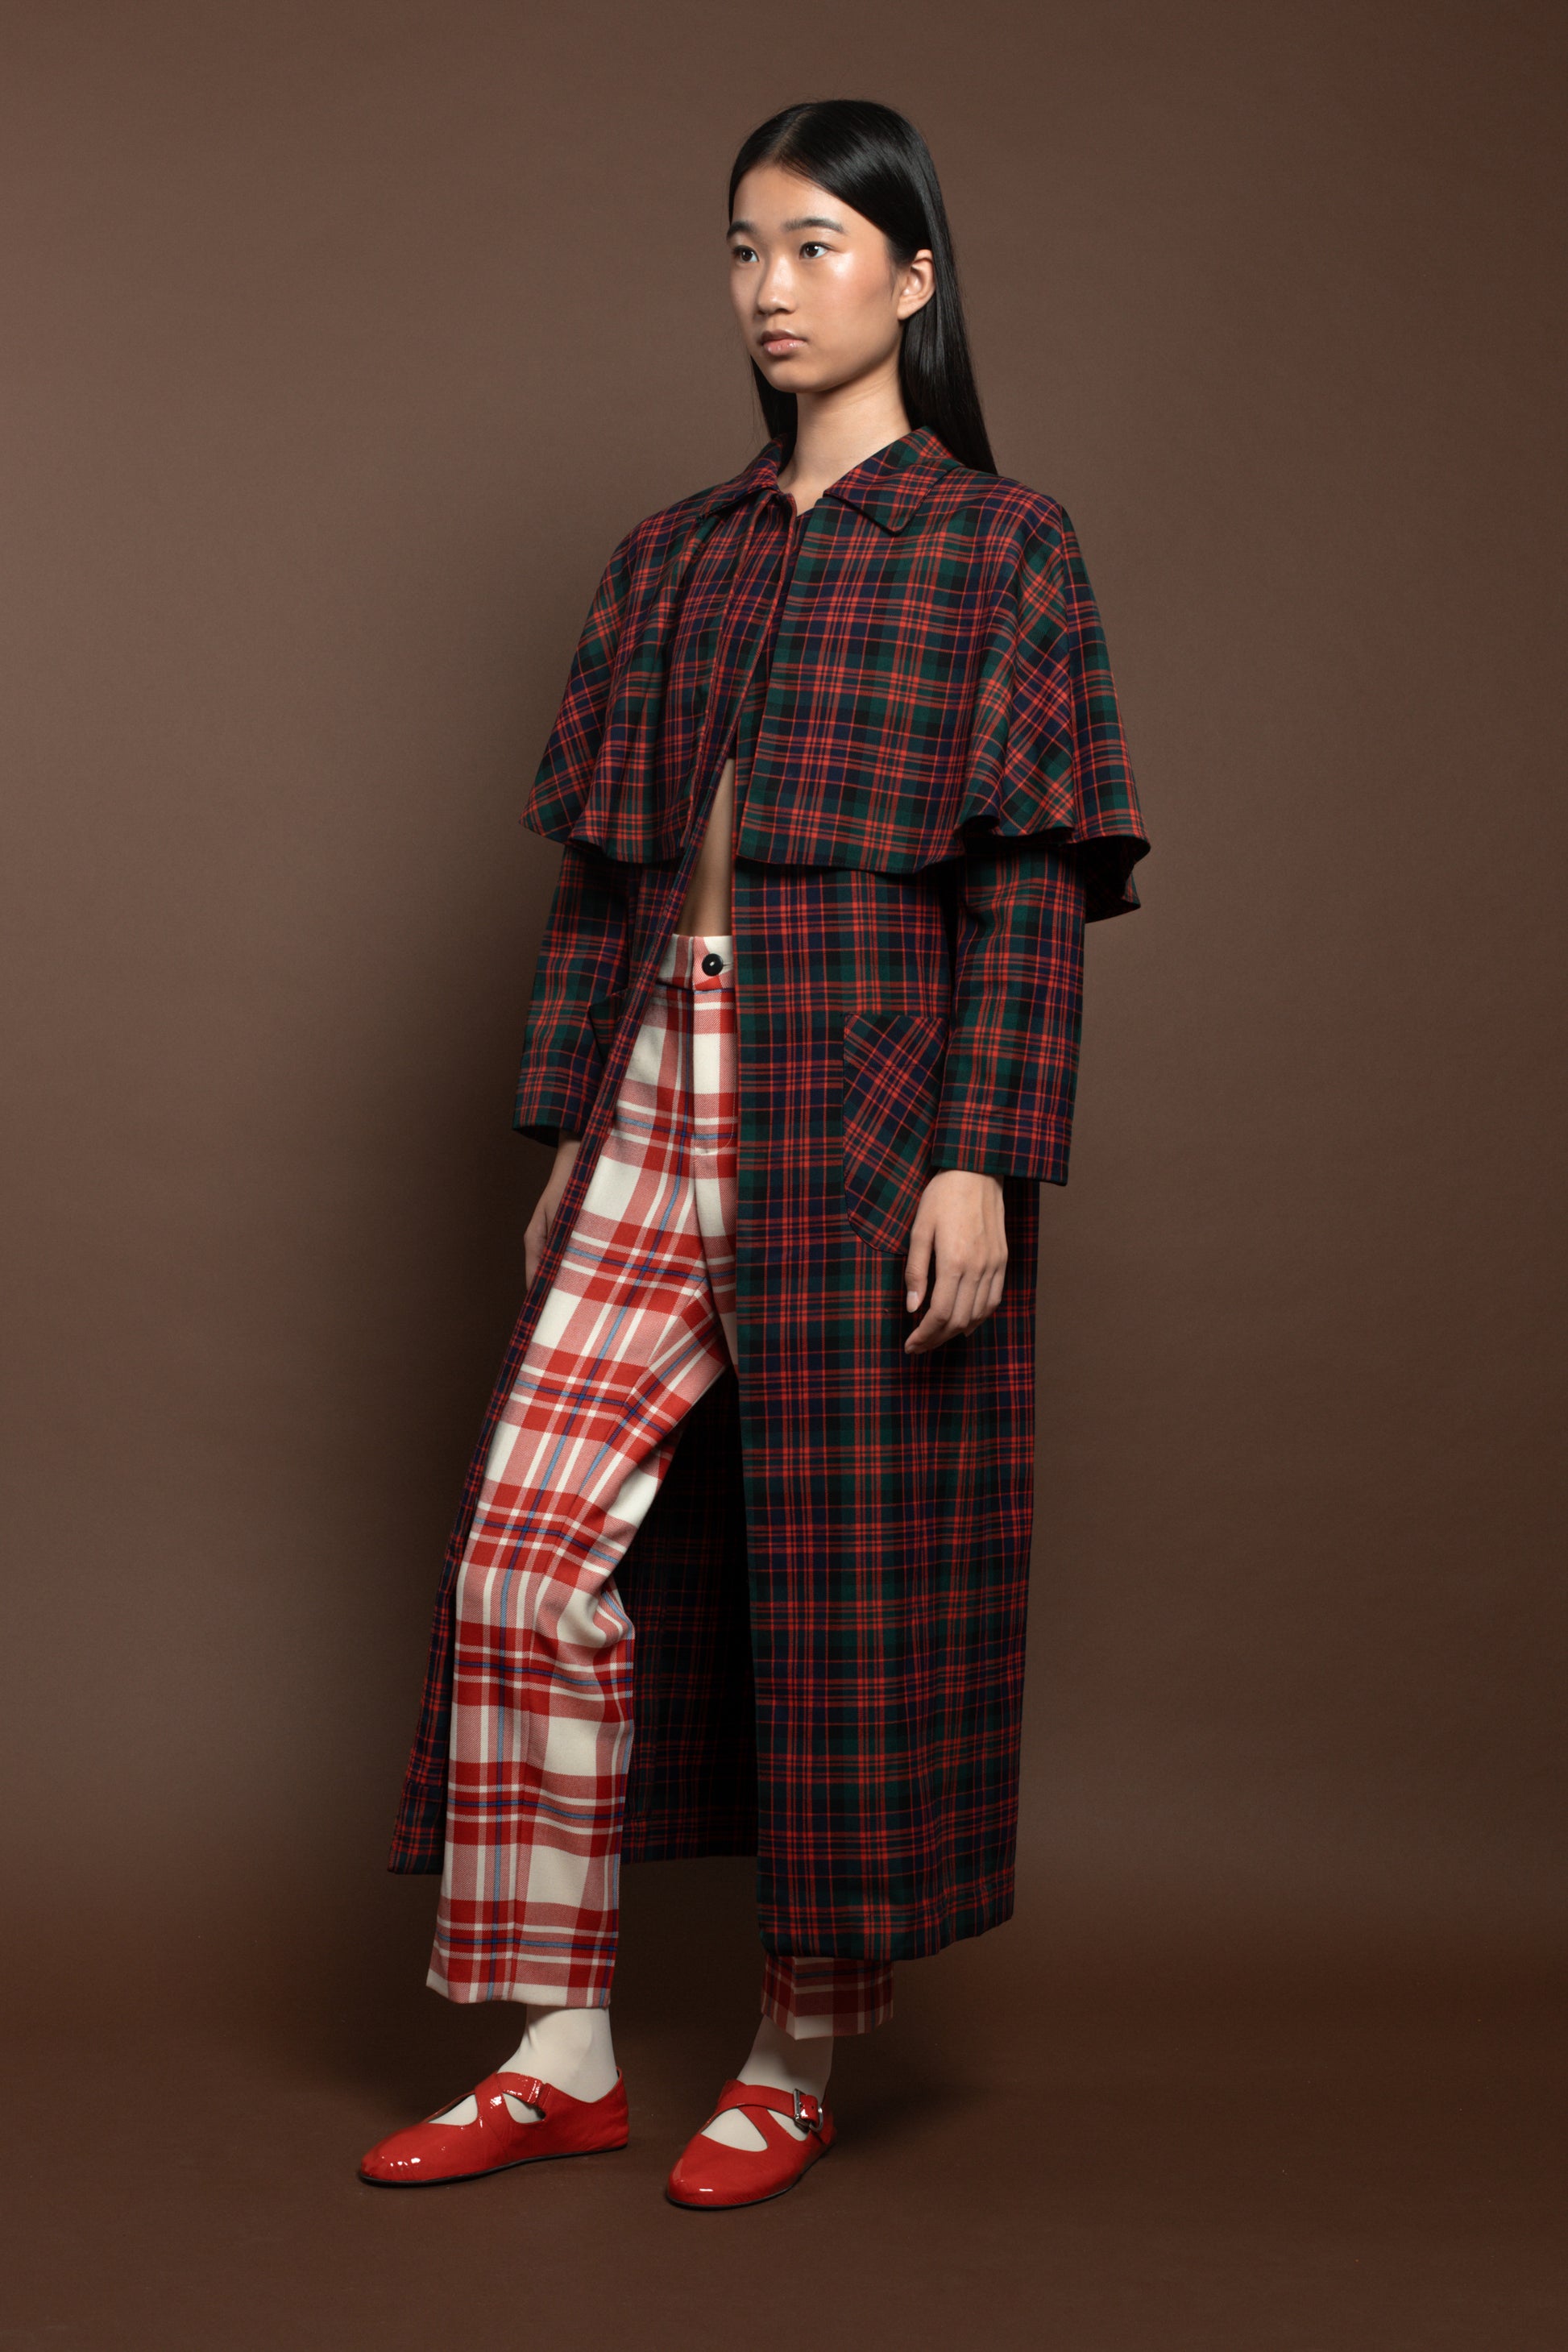 Apuntob | Long Trousers in Checked Wool